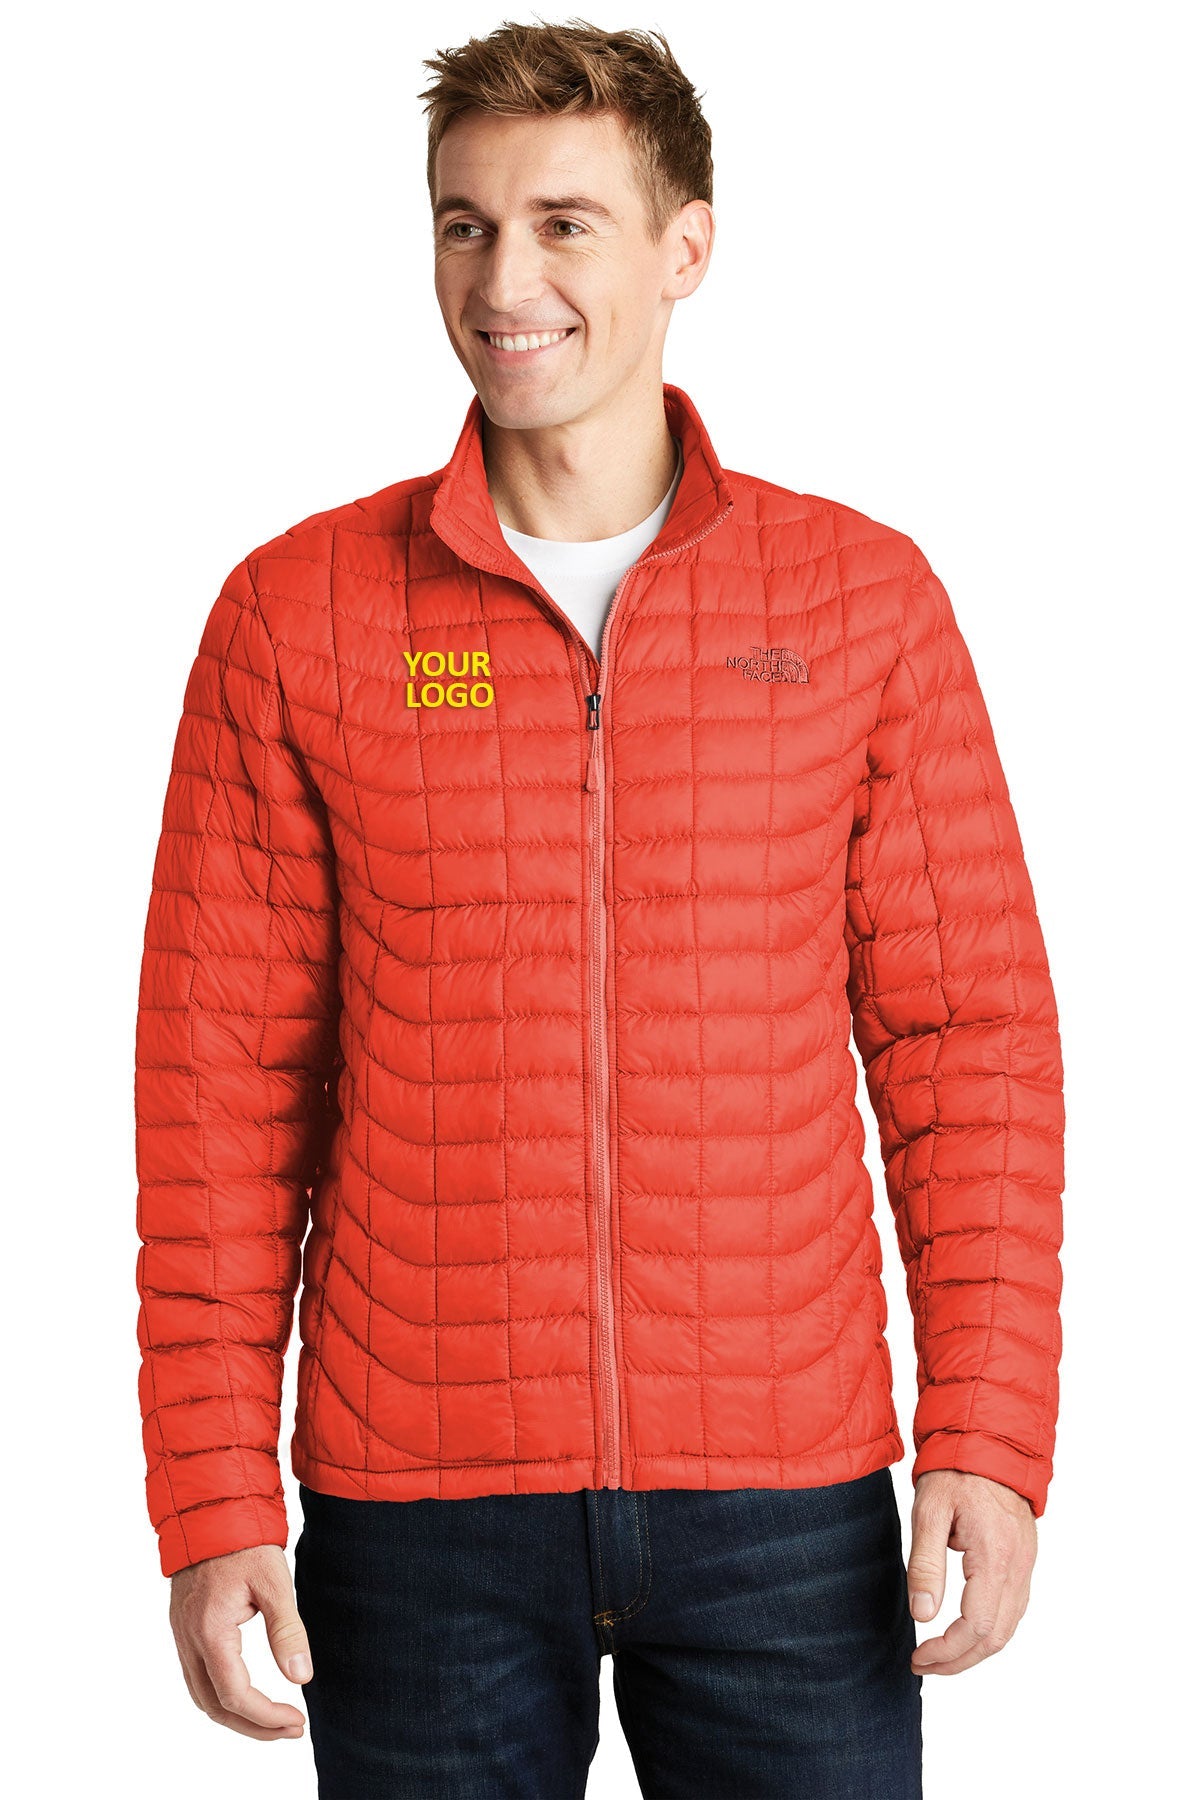 The North Face Fire Brick Red NF0A3LH2 jackets with company logo